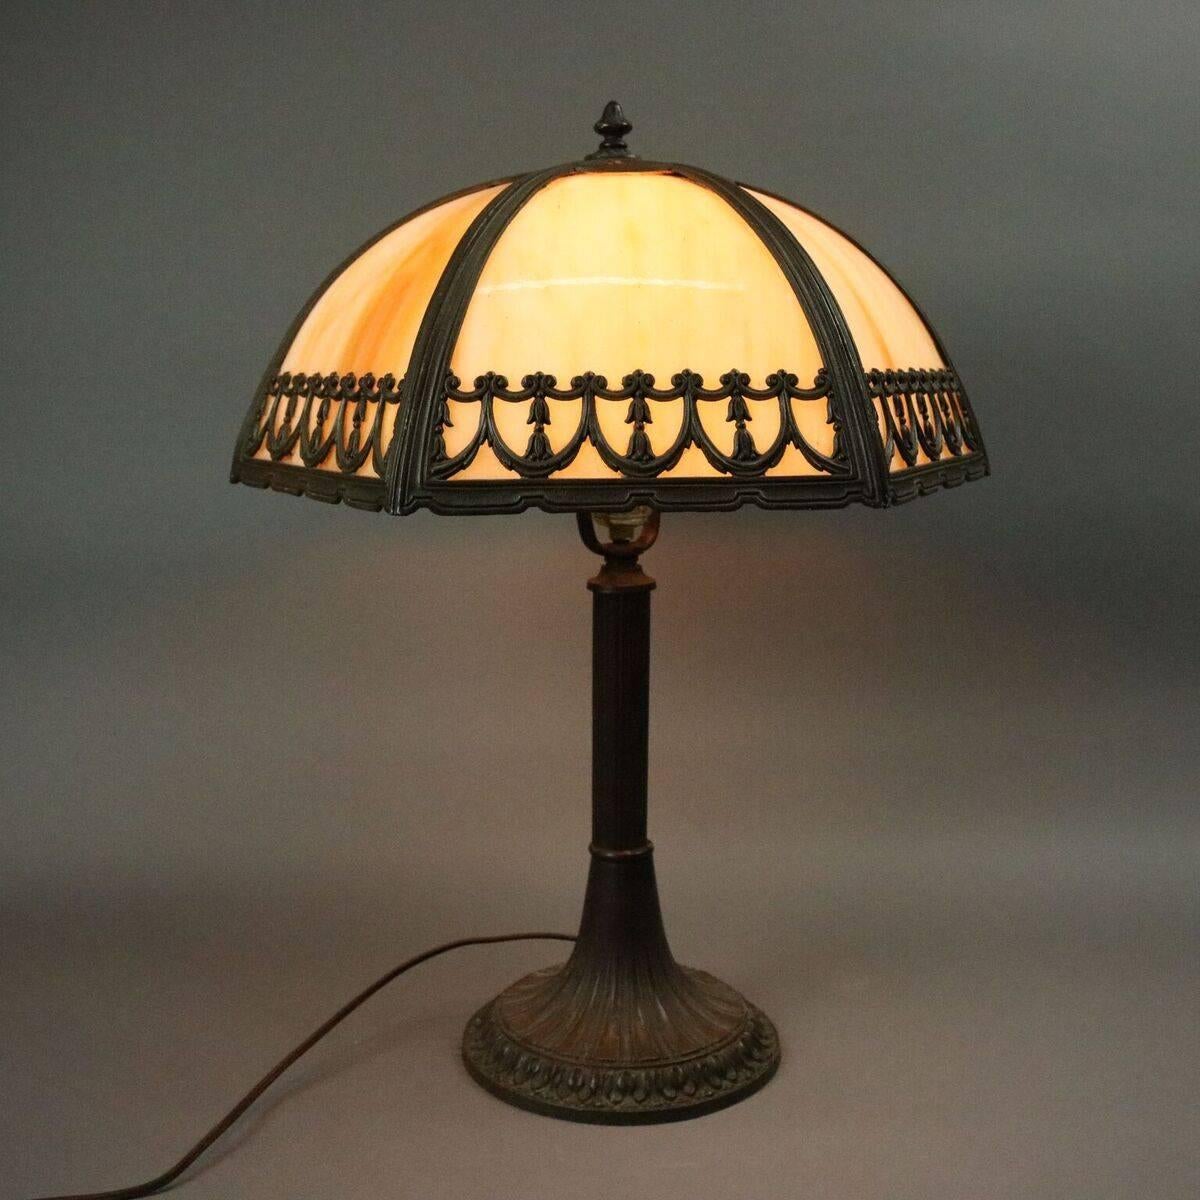 Antique Arts and Crafts table lamp by Bradley and Hubbard features six cream/caramel slag glass panels housed in pierced bronze frame with swags and bellflowers supported by gilt bronze base, circa 1920

Measures: 22" H x 17" diameter.